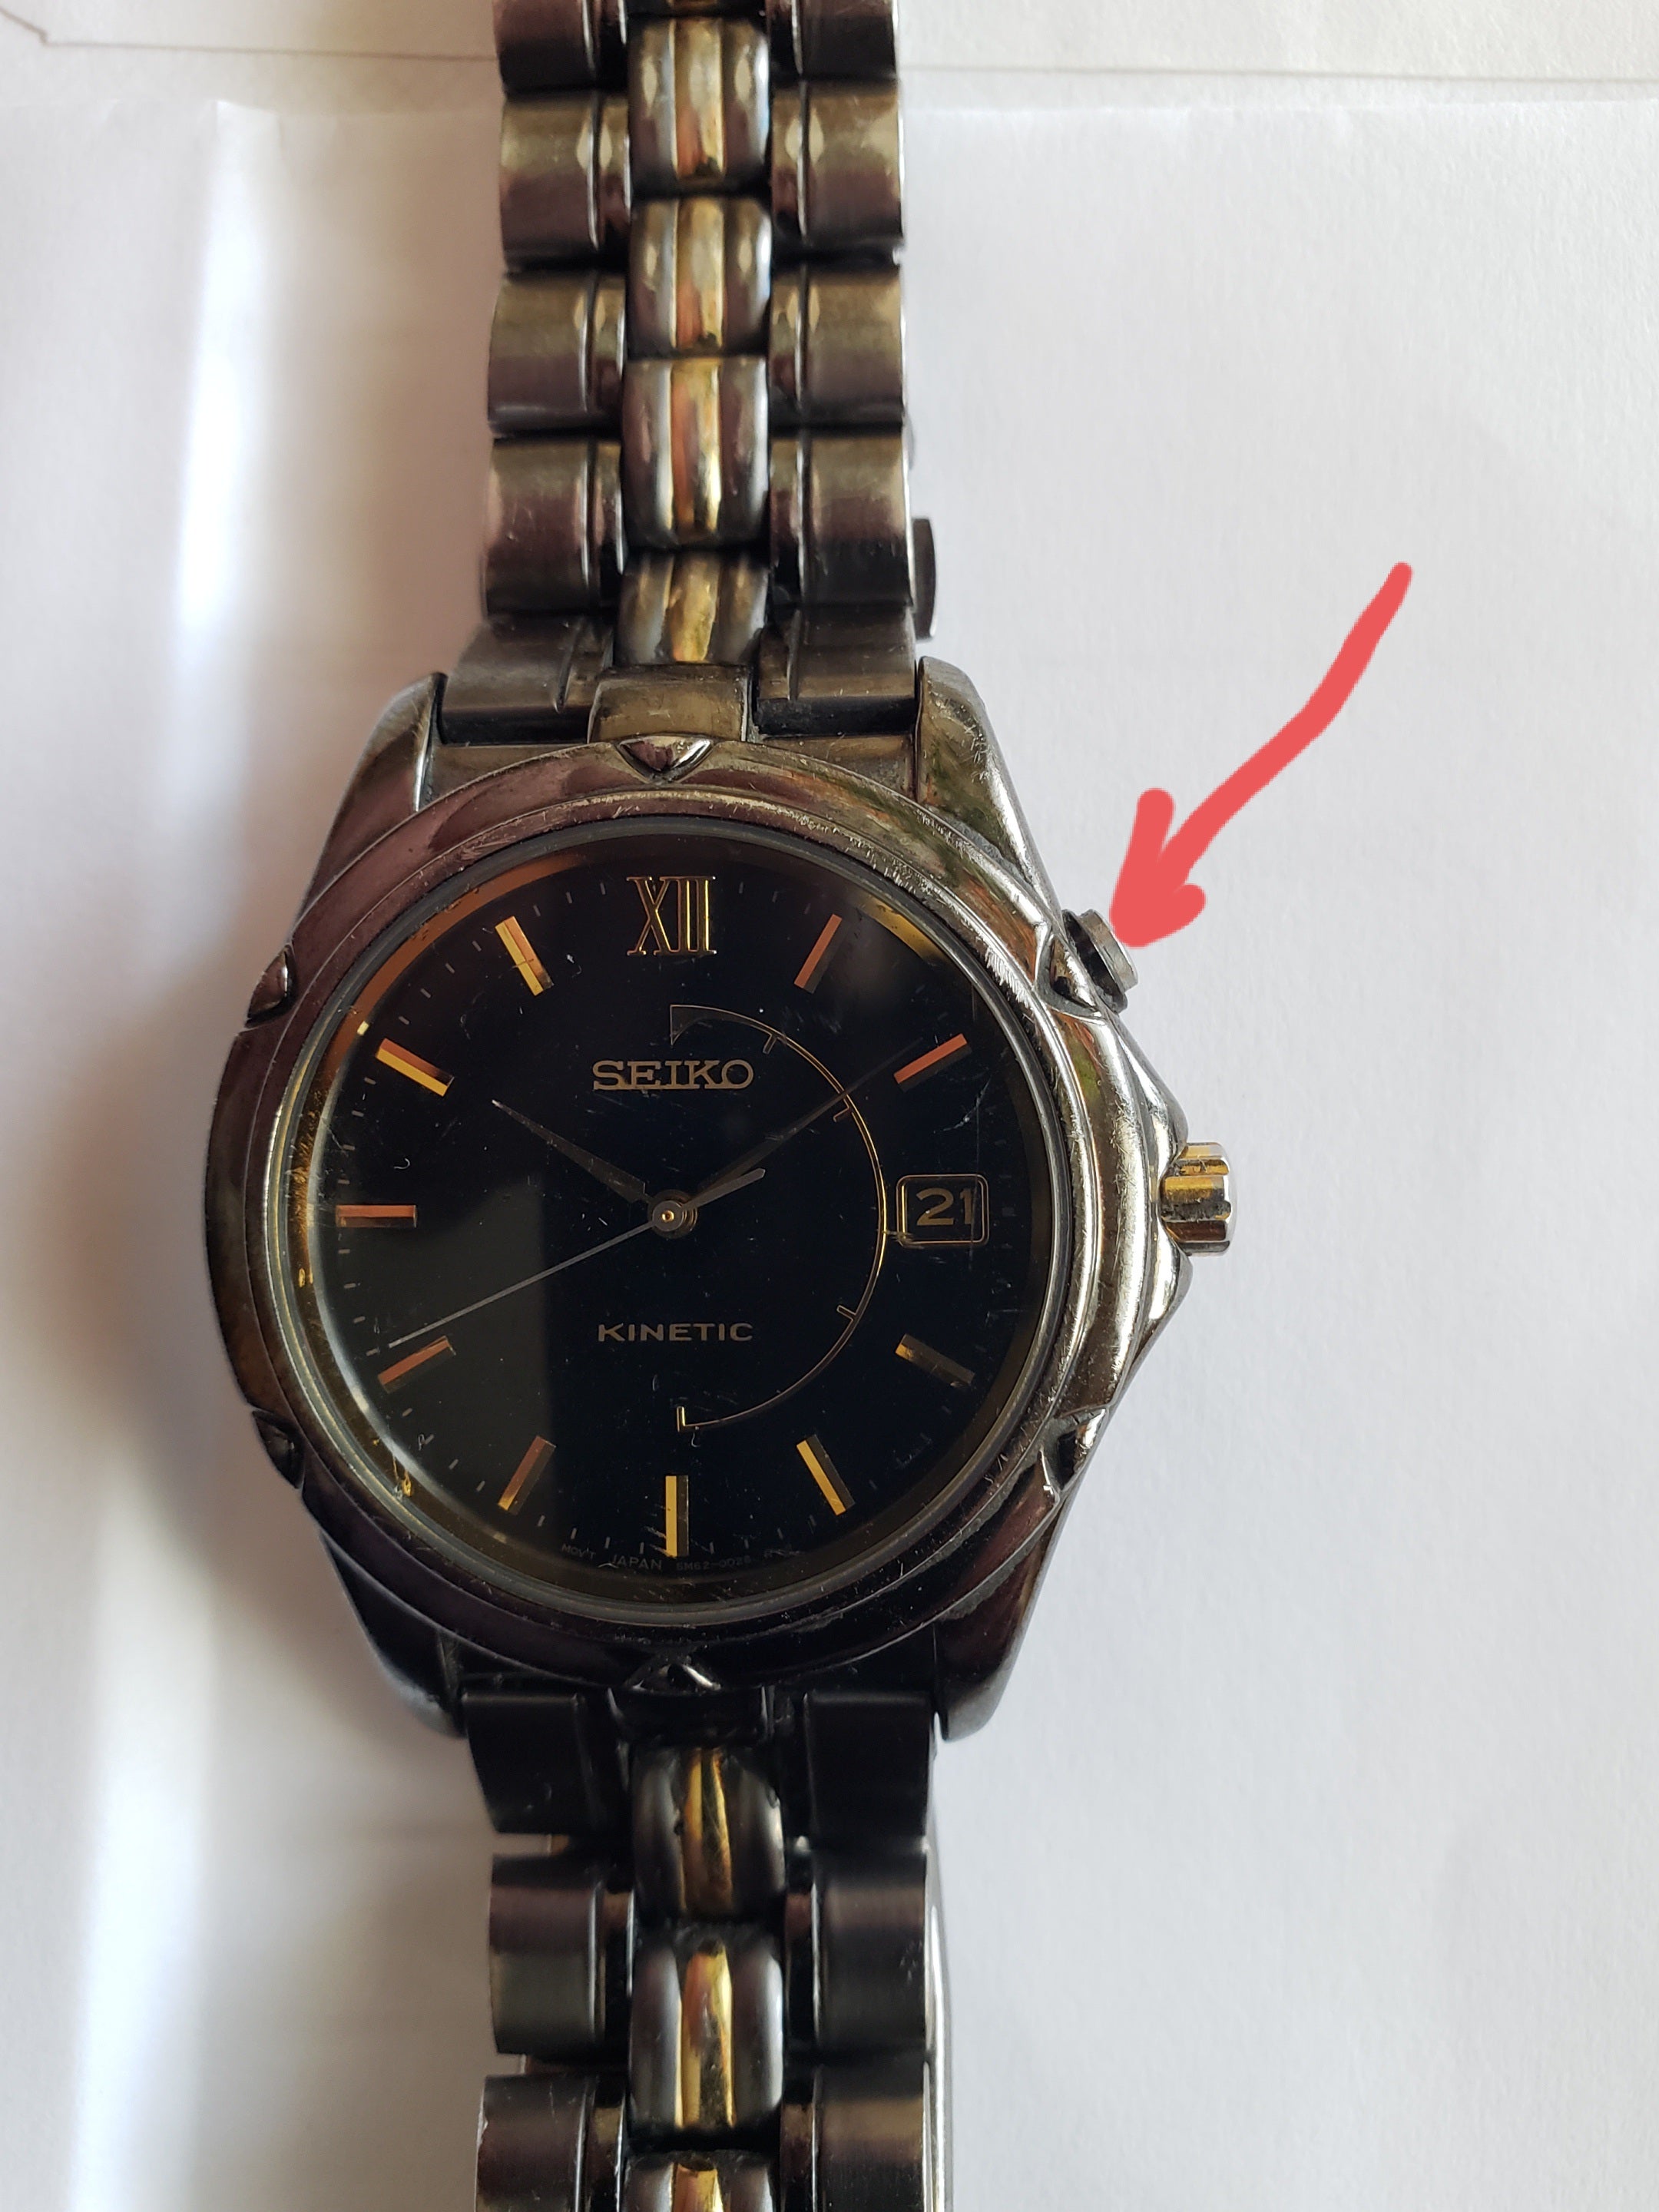 Seiko Kinetic a capacitor charge test button stuck | WatchUSeek Watch Forums